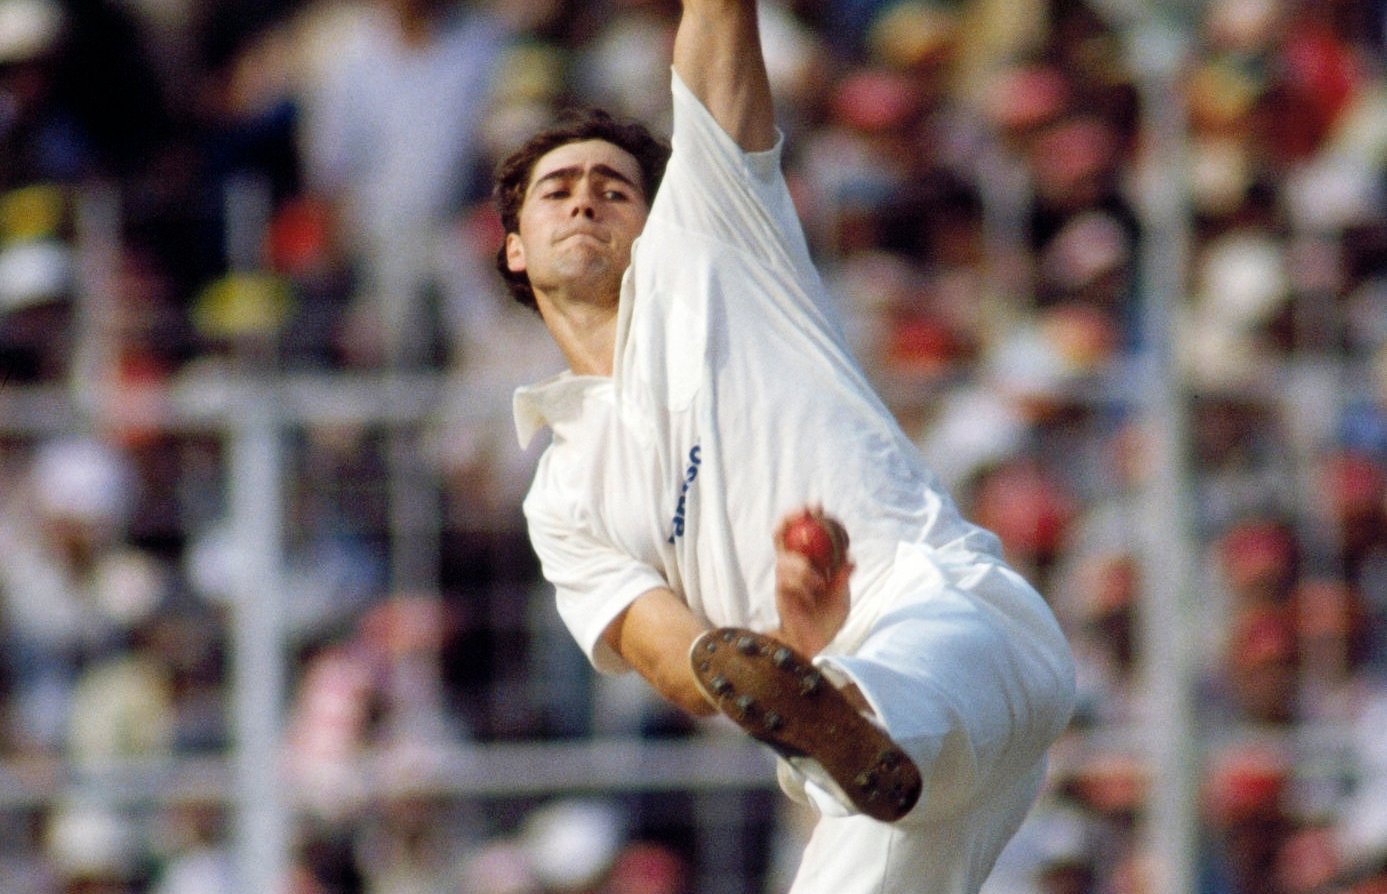 Richard Snell was picked against the Mike Getting rebel teams in the 1990s, which helped him to be picked straight back into the international cricket in India and World Cup 1992.